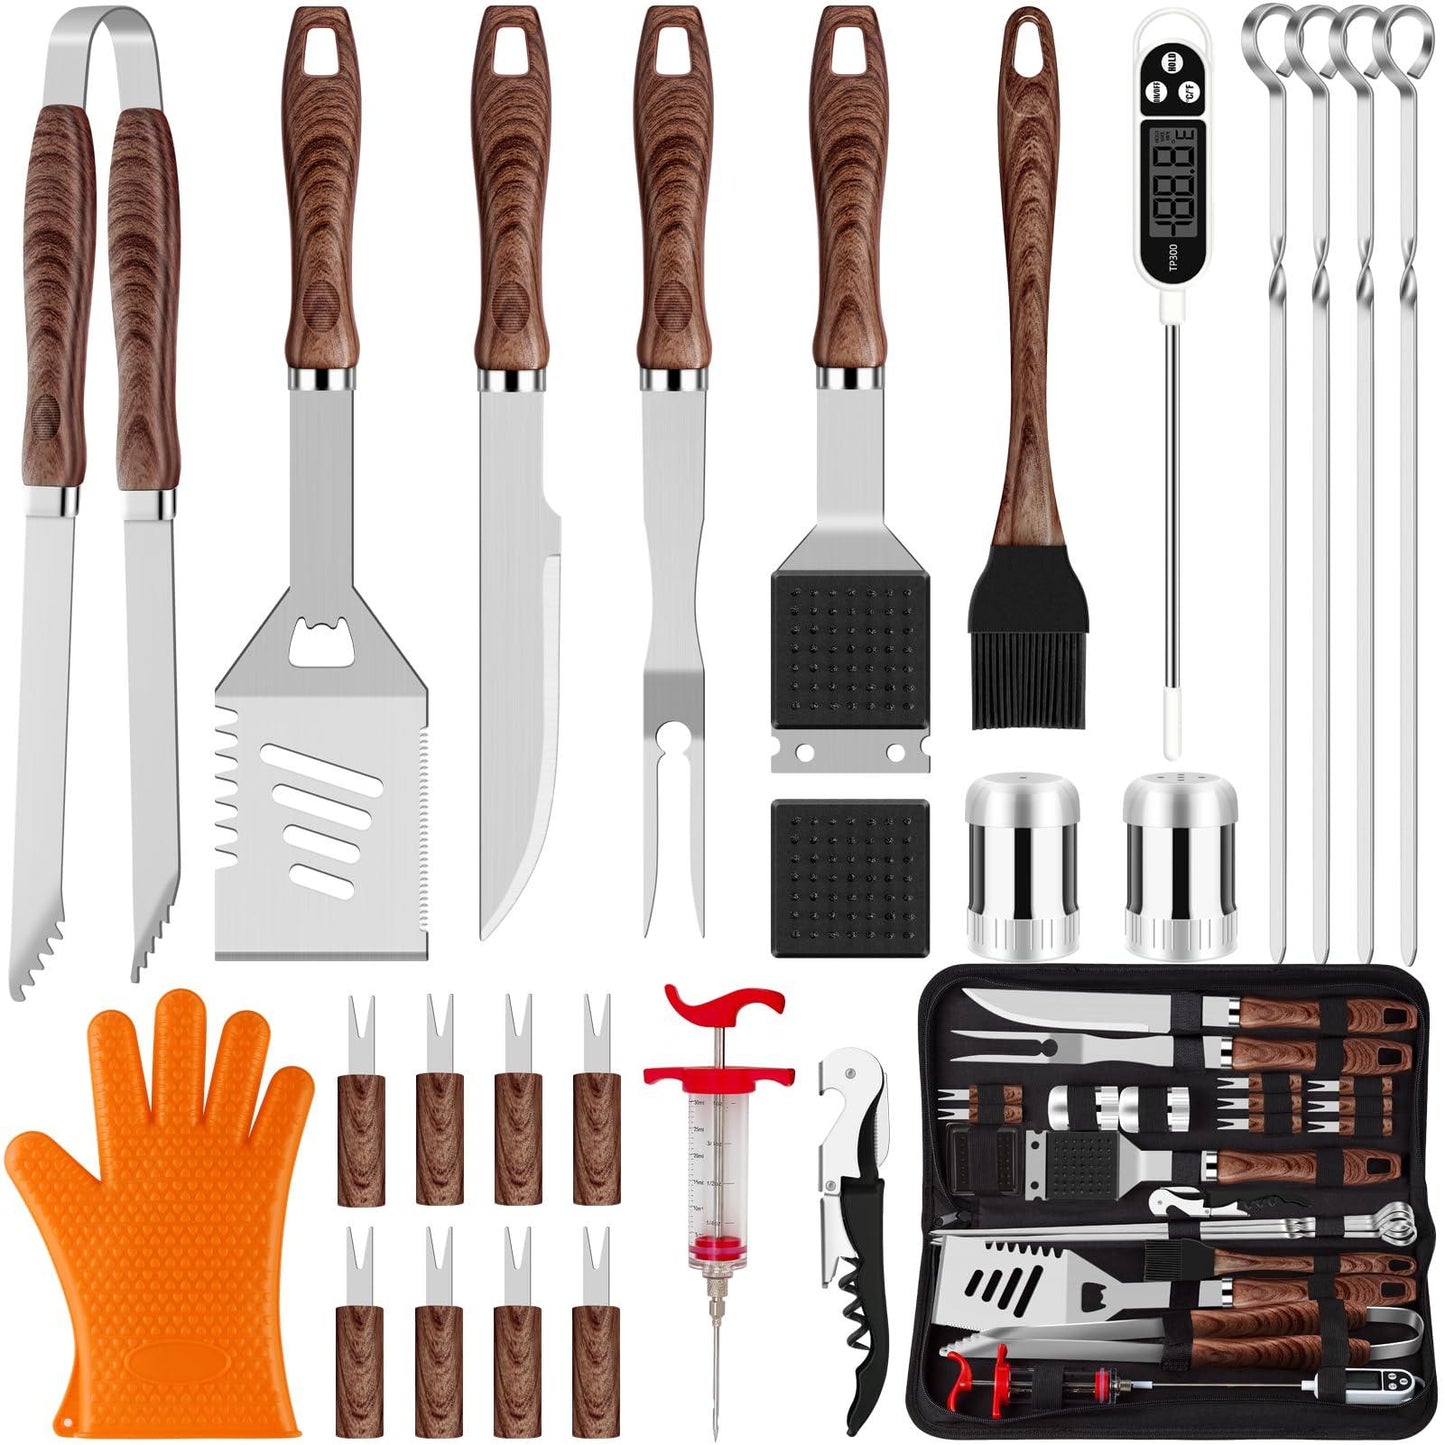 ROMANTICIST 26pcs Grilling Accessories Kit for Men Women, Stainless Steel Heavy Duty BBQ Tools with Glove and Corkscrew, Grill Utensils Set in Portable Canvas Bag for Outdoor,Camping,Backyard,Brown - CookCave